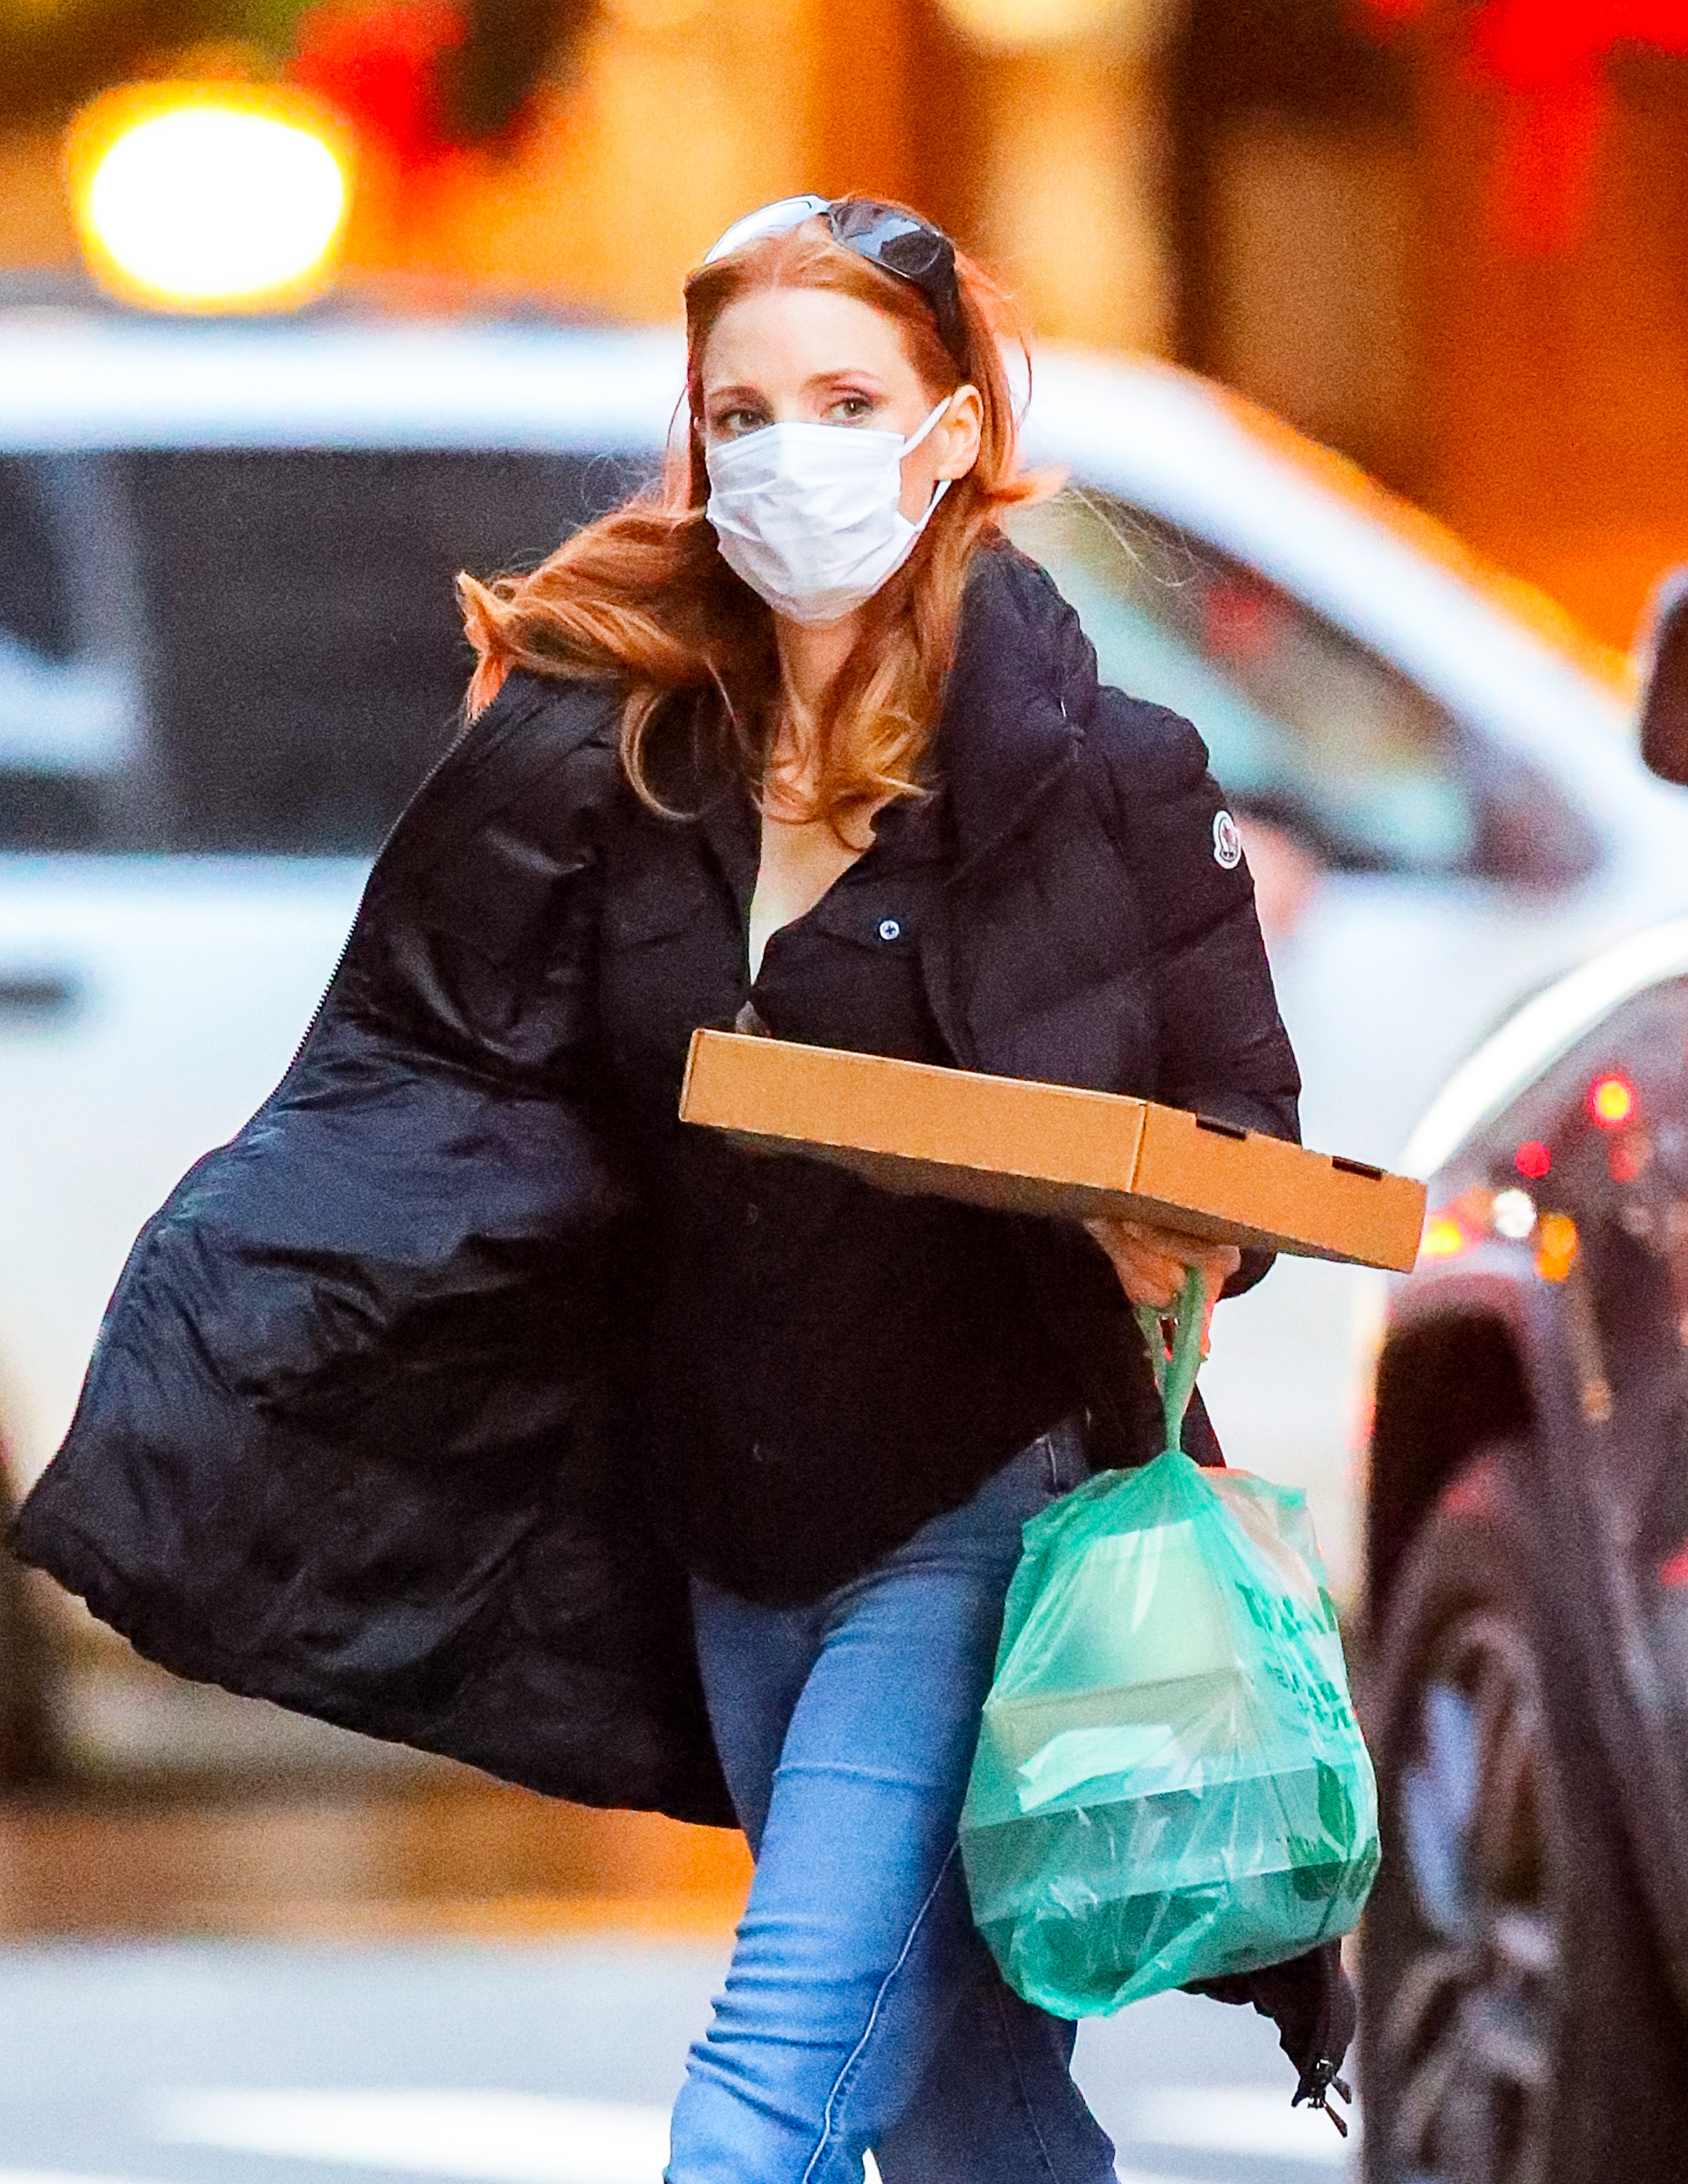 jessica_chastain_-_in_nyc_20201129__1_.jpg